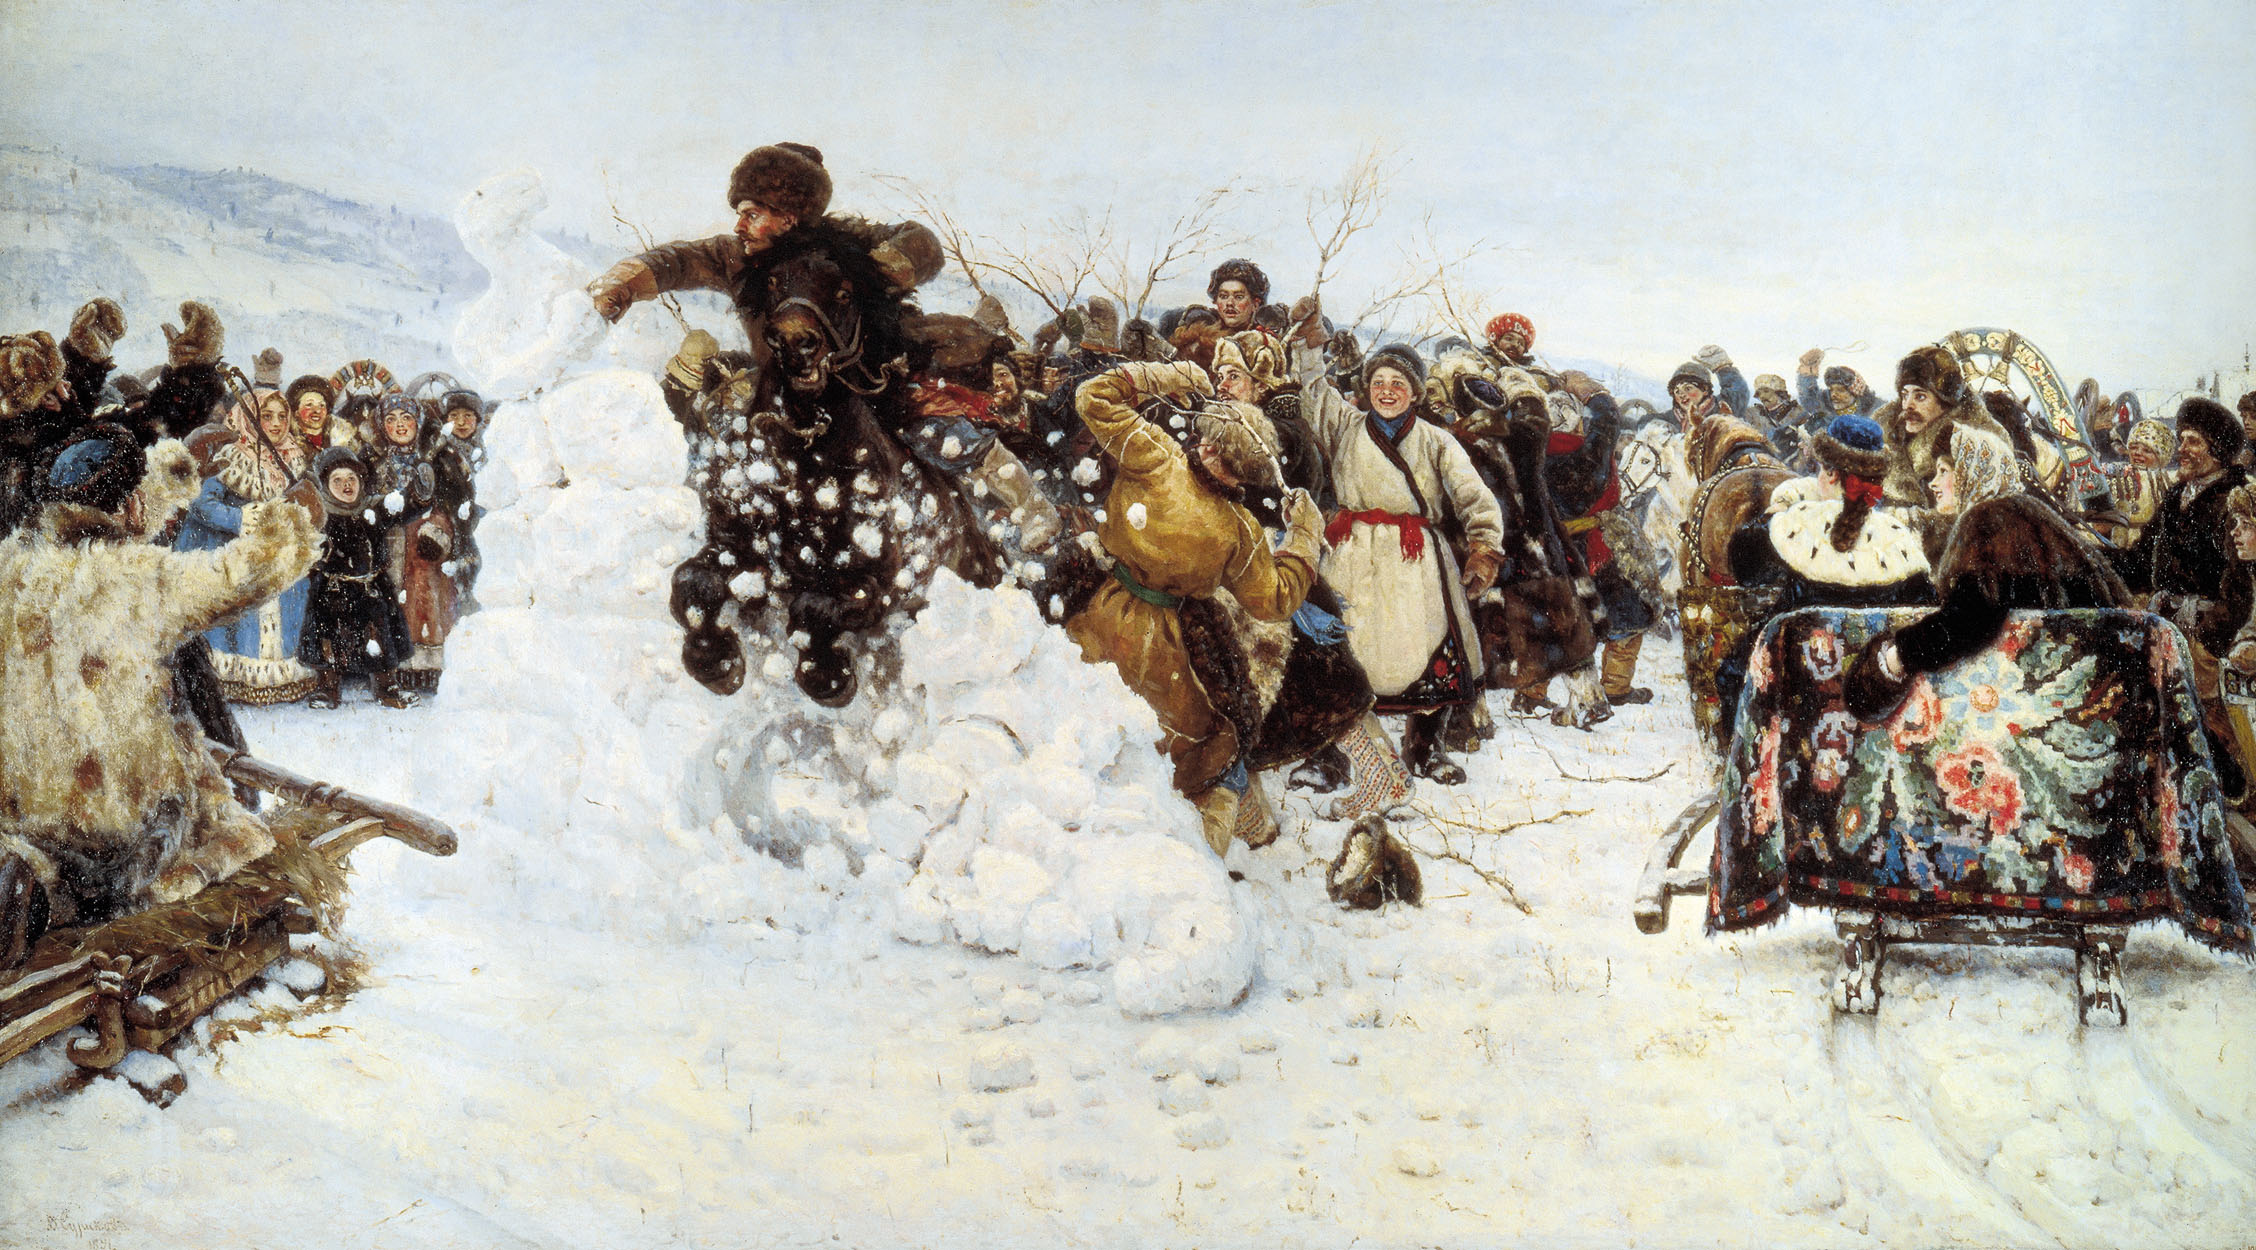 Taking a snowy town (1891).